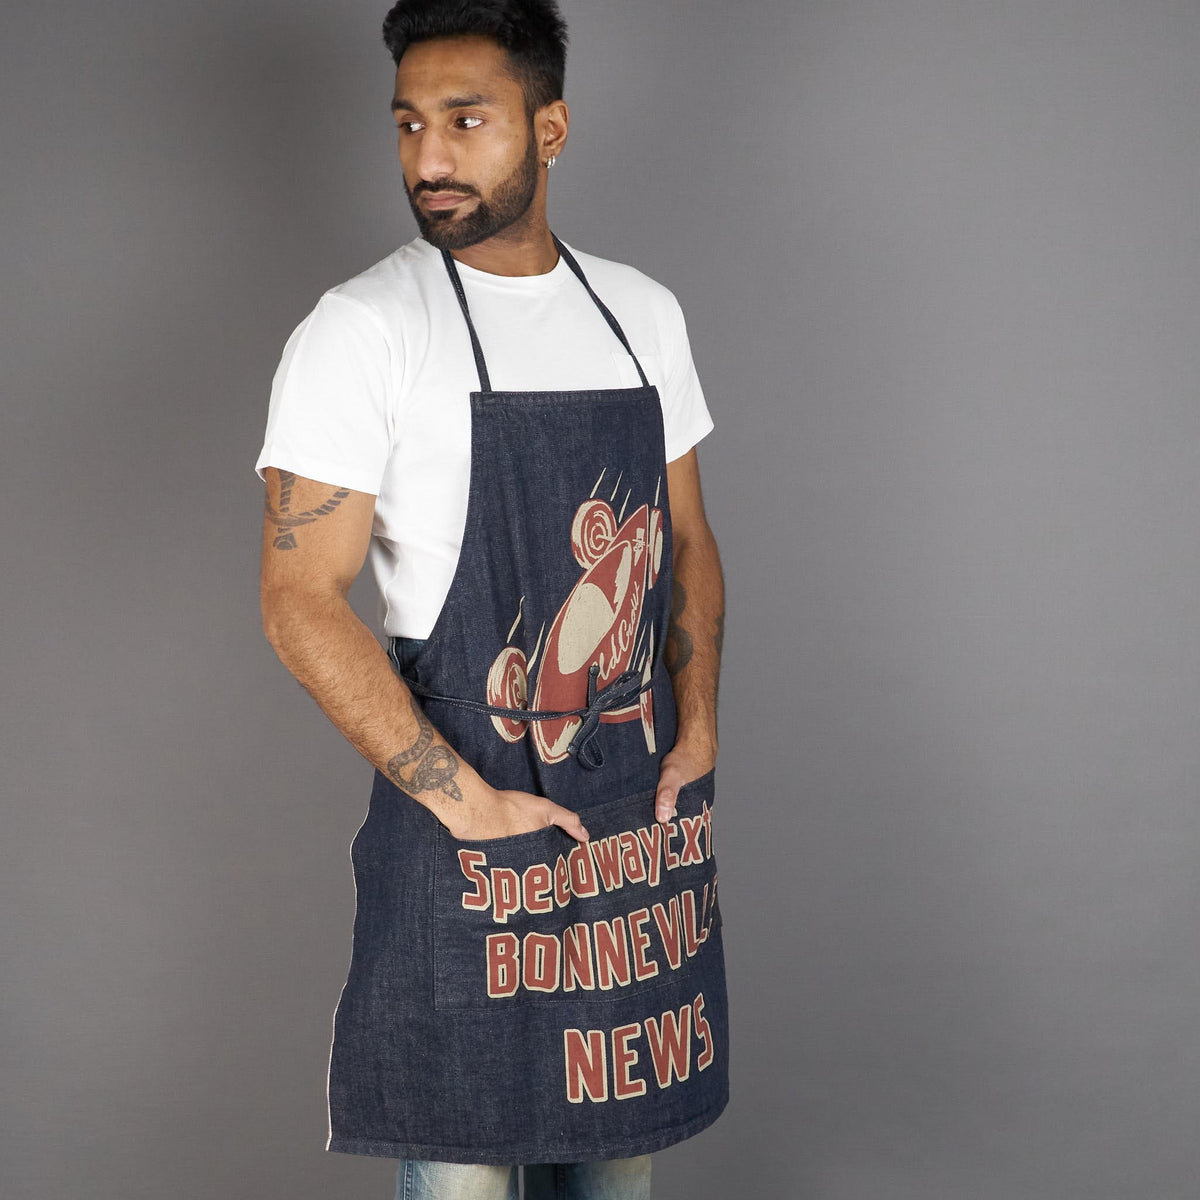 Old Crow Speed Shop by Glad Hand &amp; Co. Apron